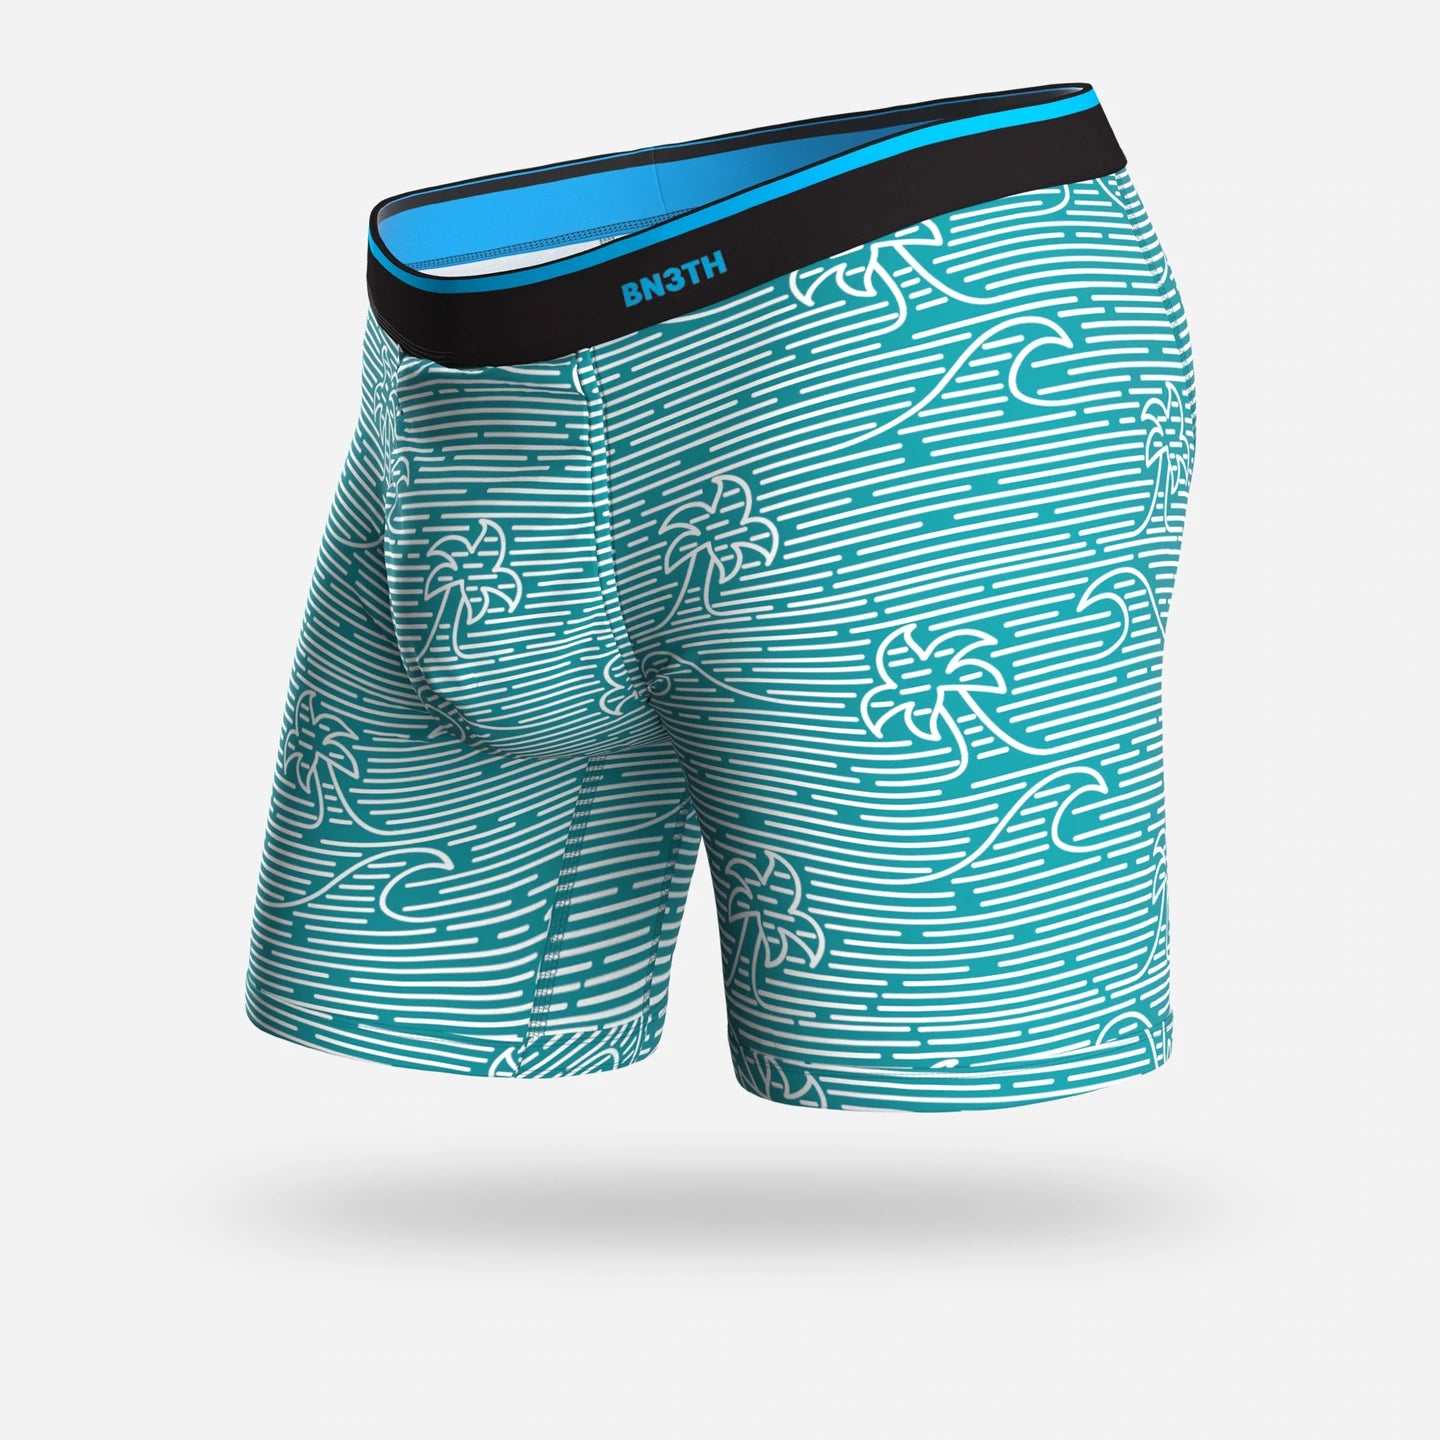 BN3TH BOXER BRIEF IN LINEAR WAVE TURQUOISE